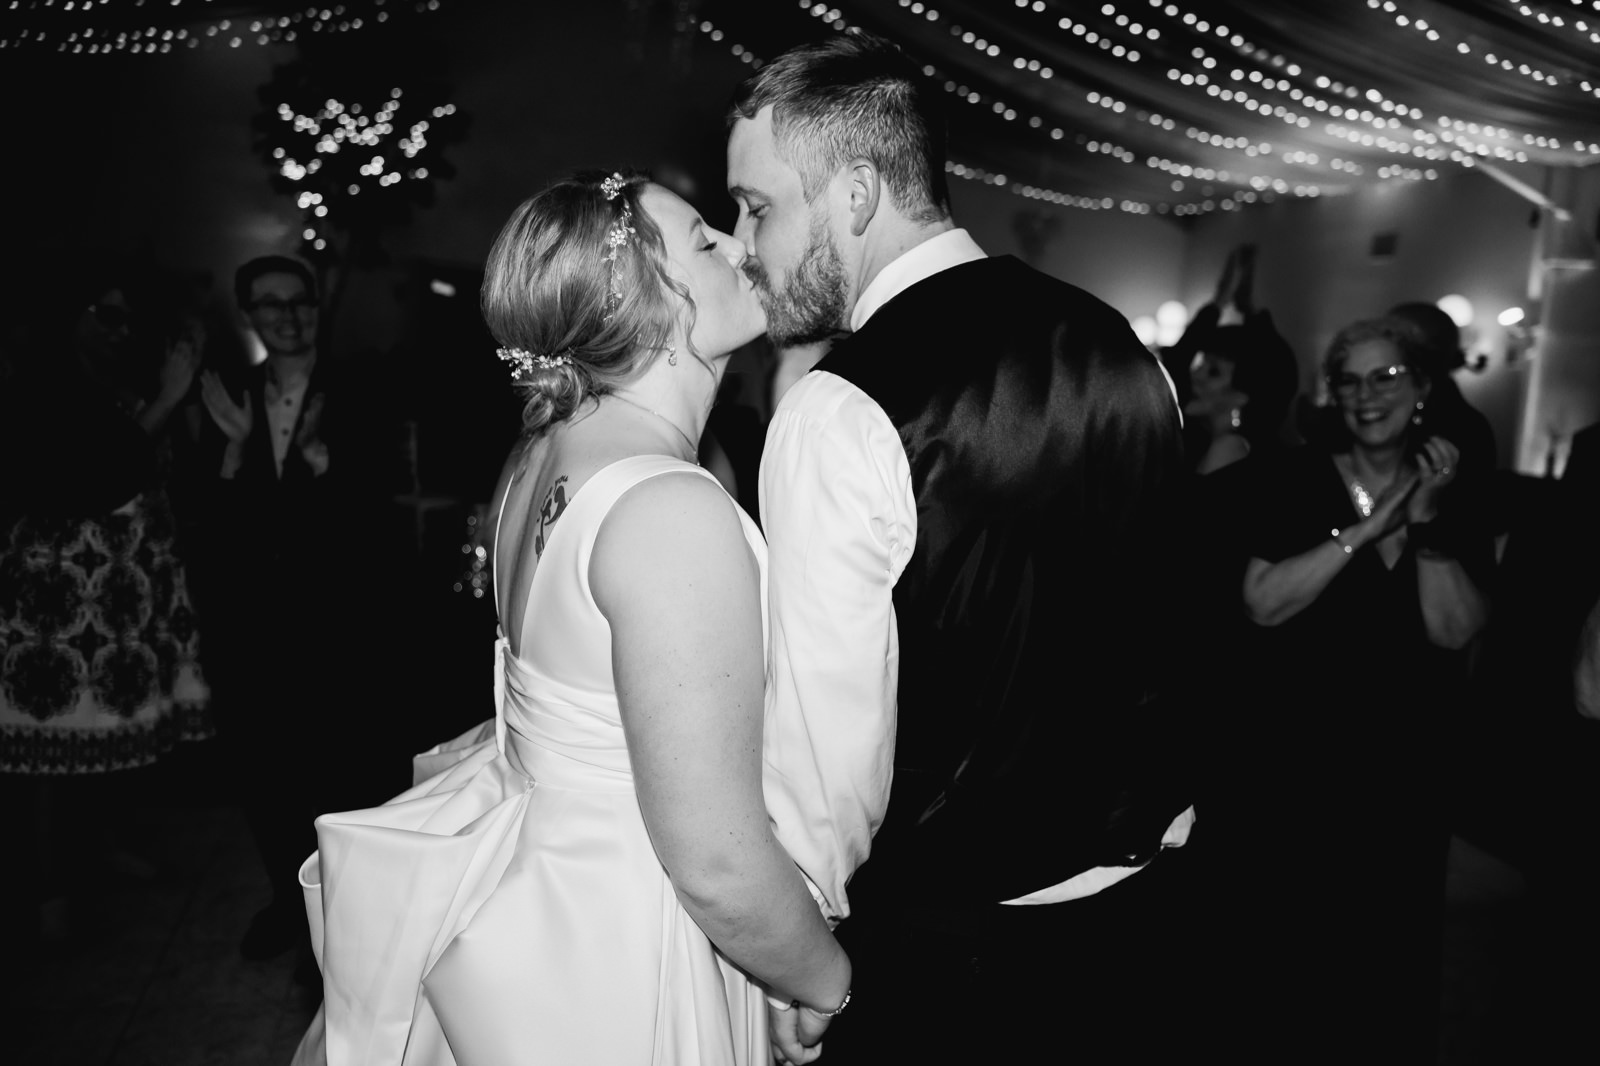 Bride and groom kissing at the end of the night at secret garden wedding menu